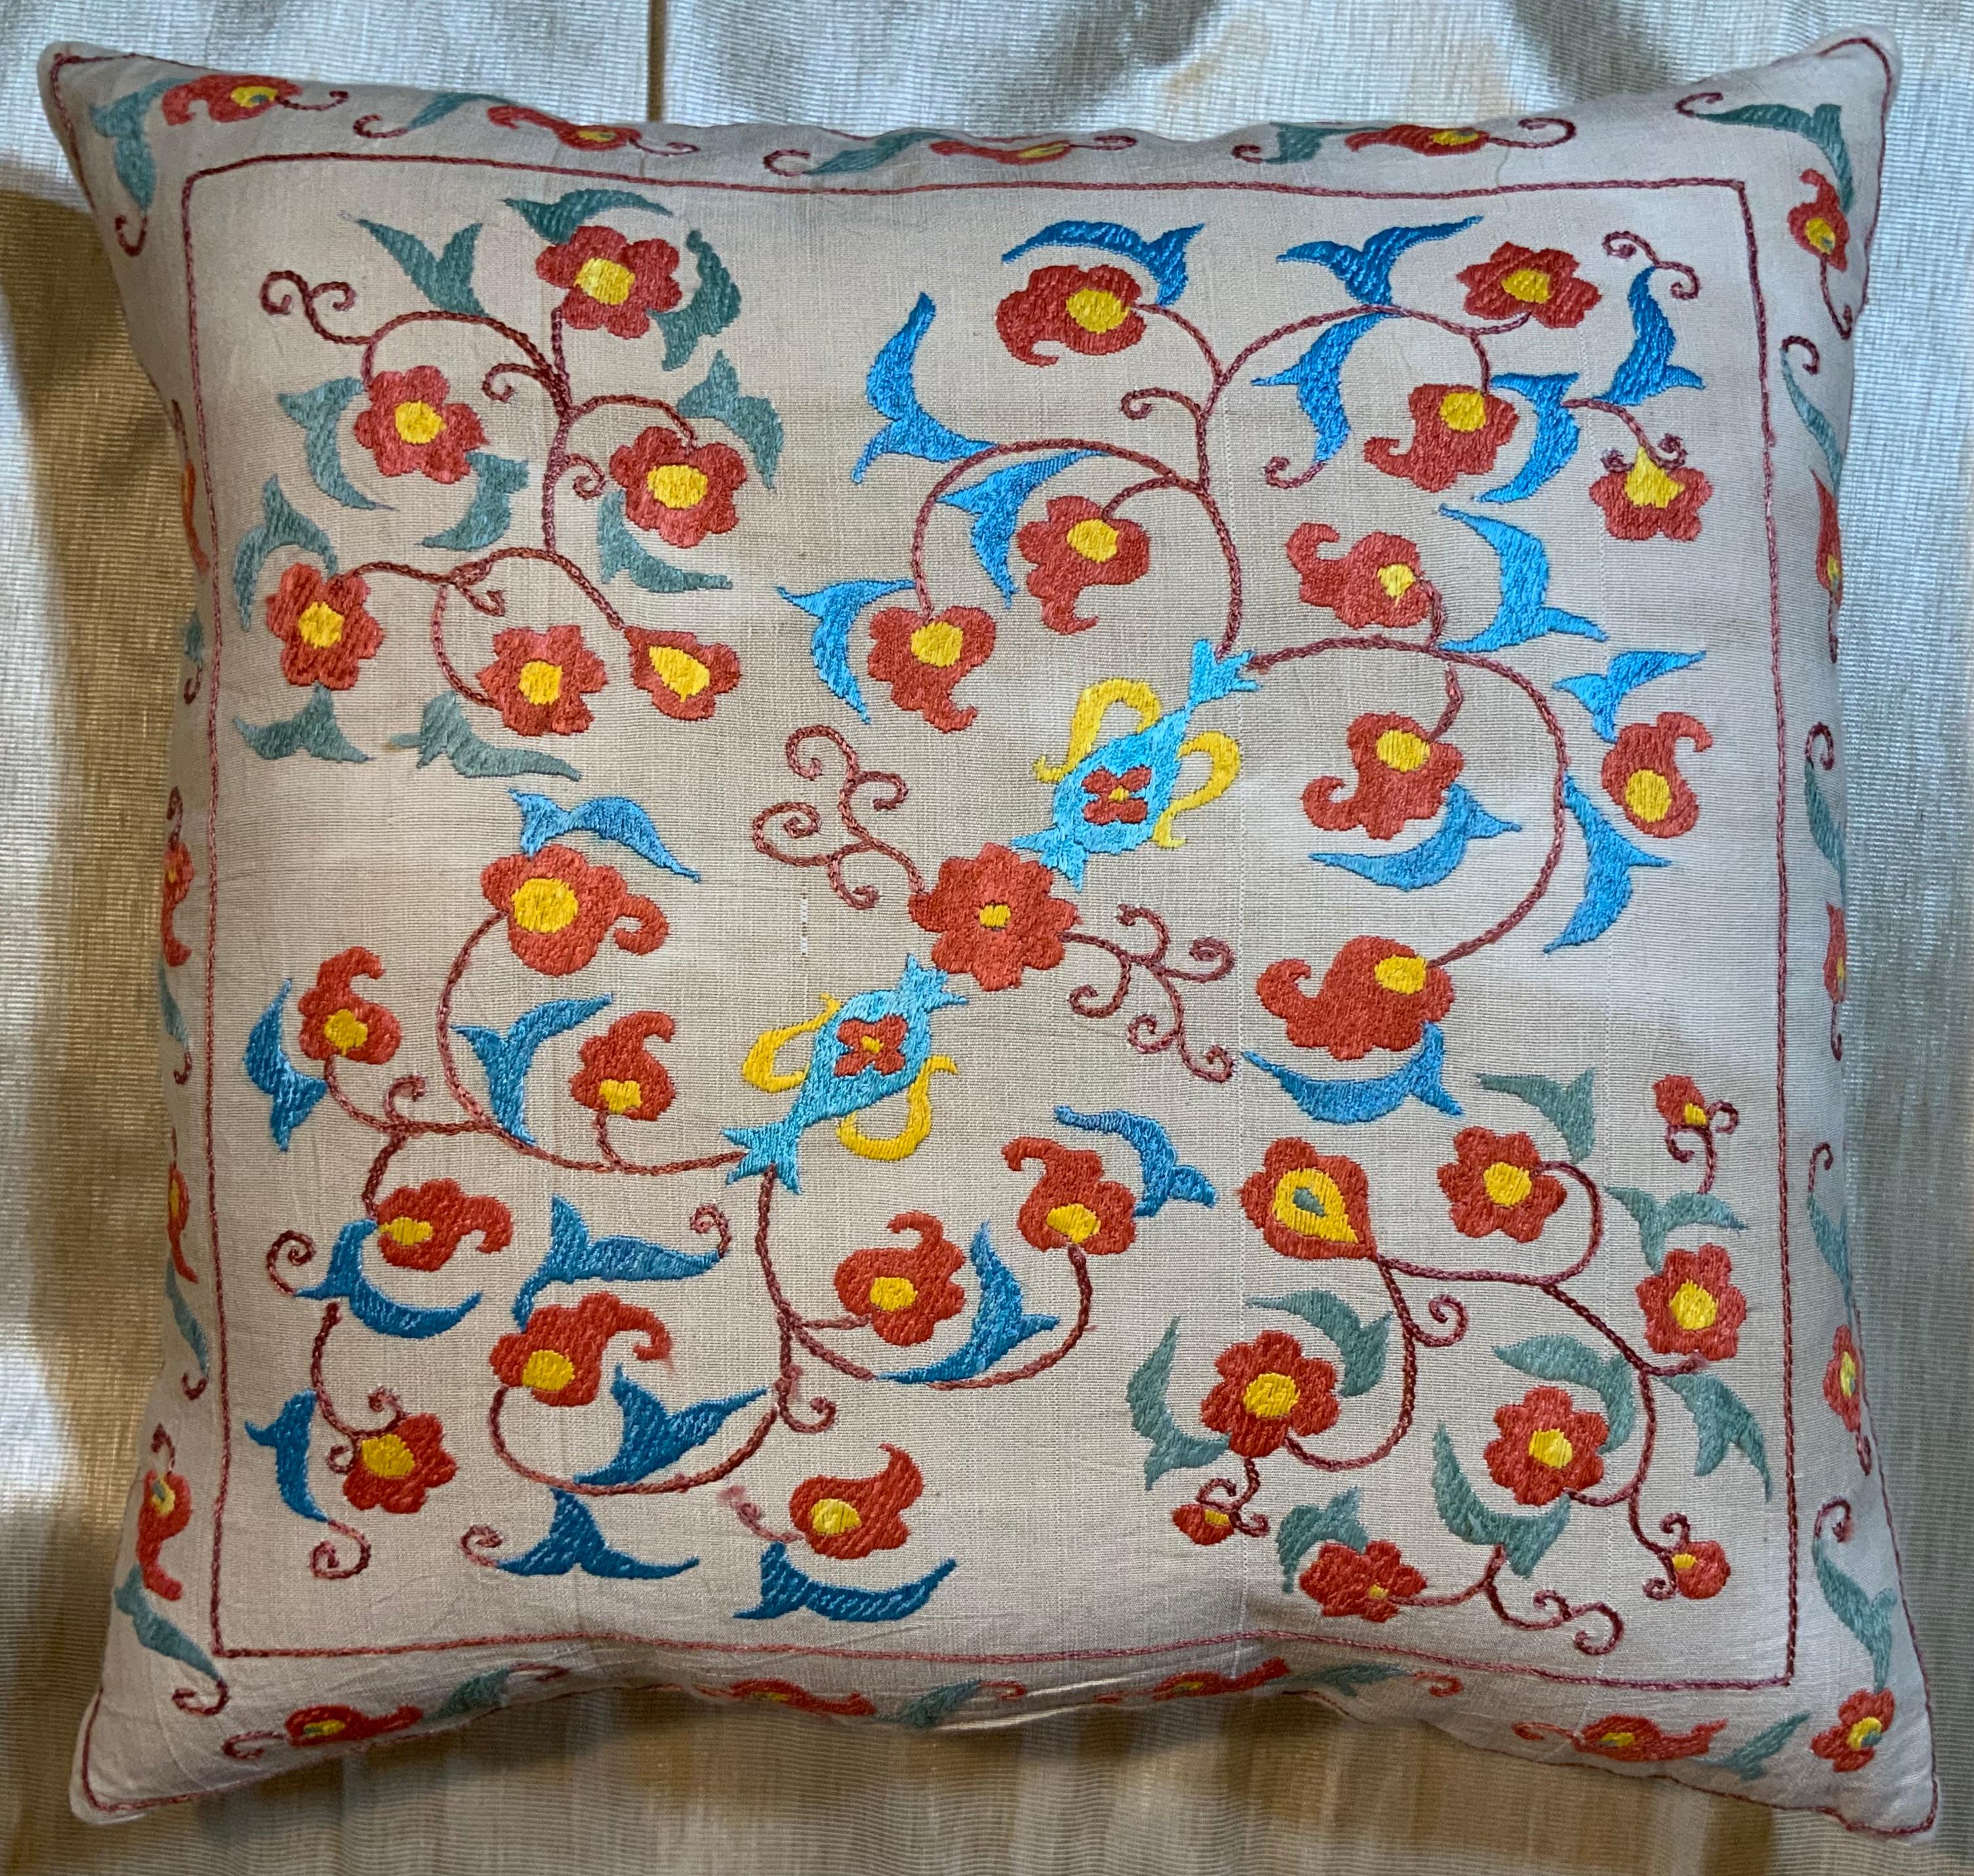 Beautiful pillow made of hand embroidery silk on cream color cotton background, flowers and vine motifs, cotton backing with zipper, fresh new insert.